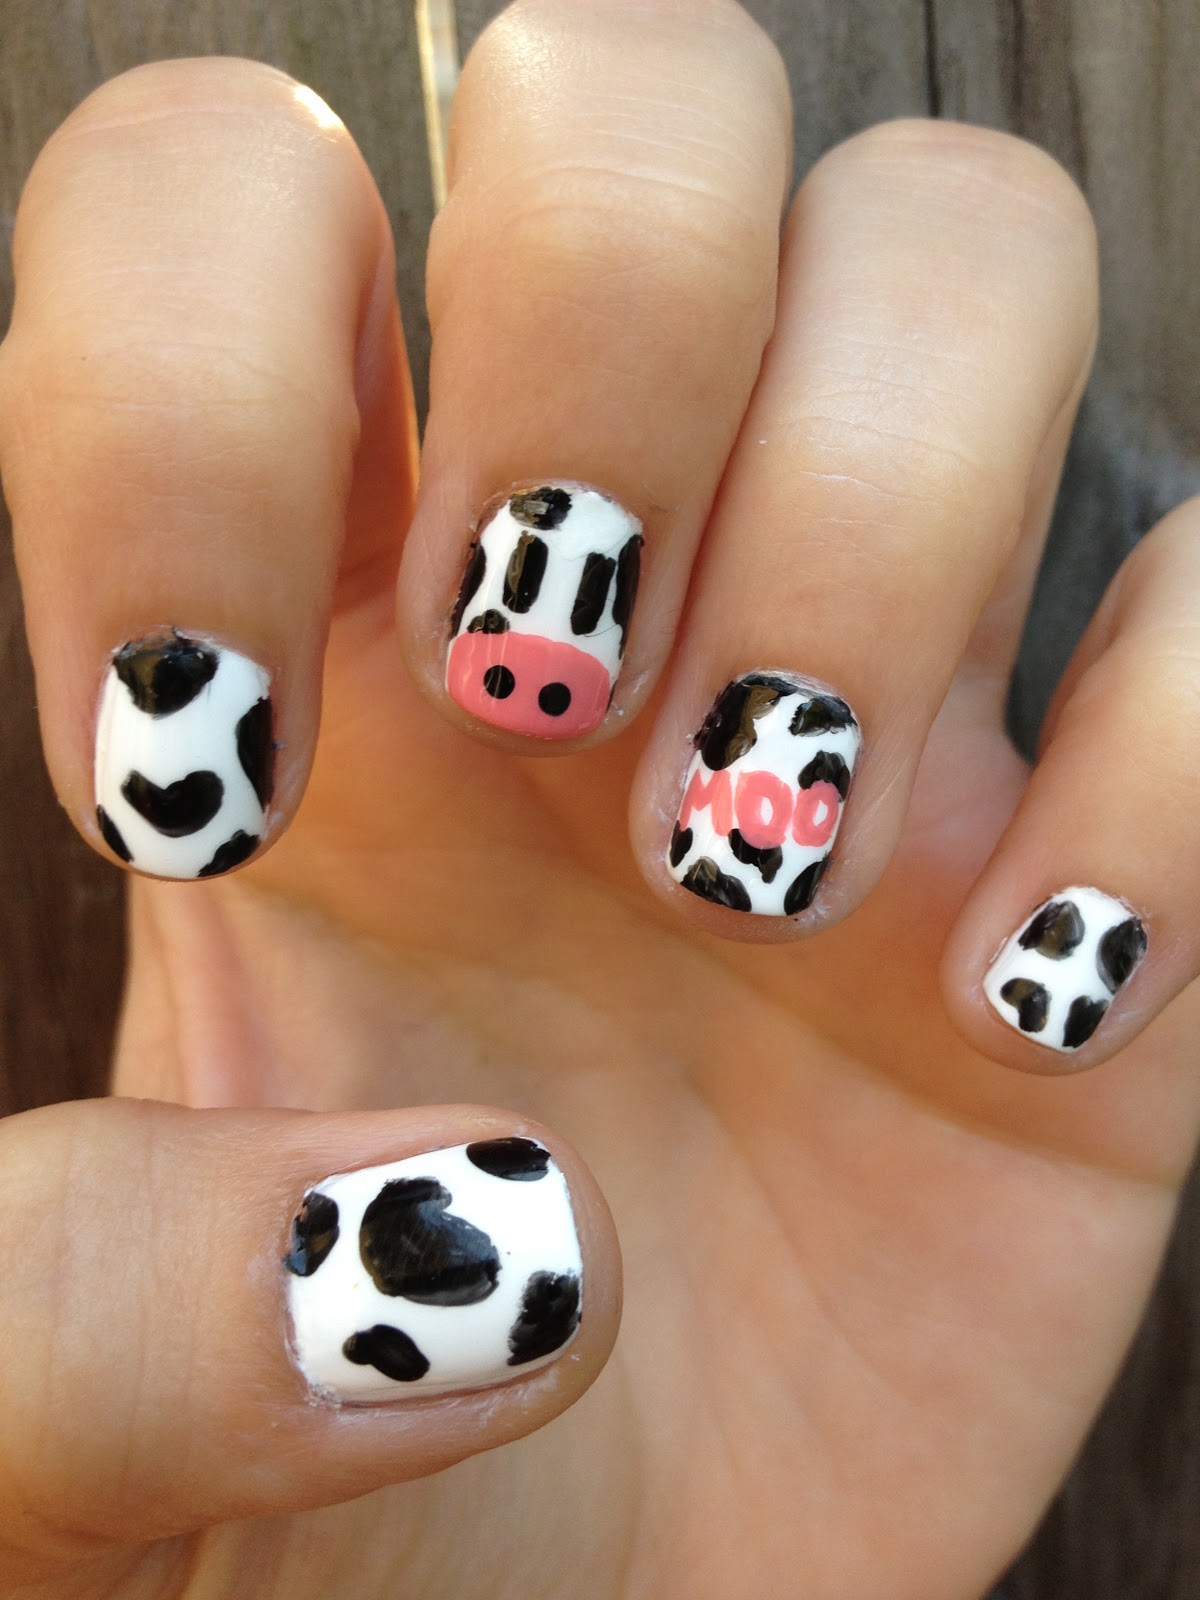 Miscellaneous Manicures: Cow Nails - Maynicure Challenge #14